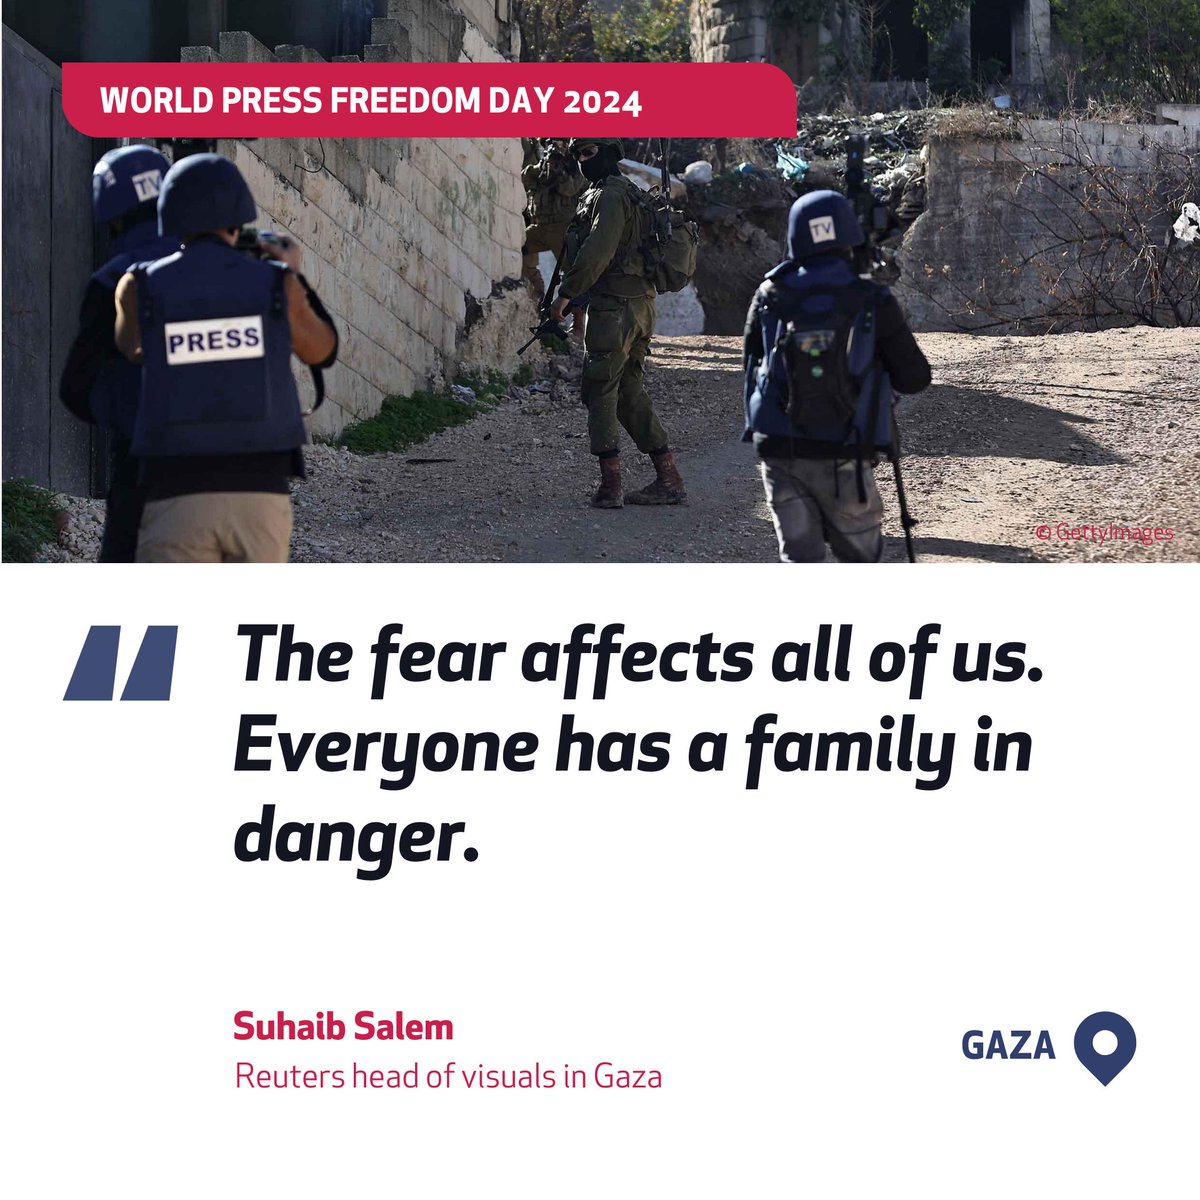 Nearly 100 Palestinian journalists have been killed in Gaza since the start of the conflict. On #WorldPressFreedomDay, @DaniellaPeled talks to @suhaibpix about the challenges of covering the war while trying to keep colleagues and families safe. iwpr.net/global-voices/…